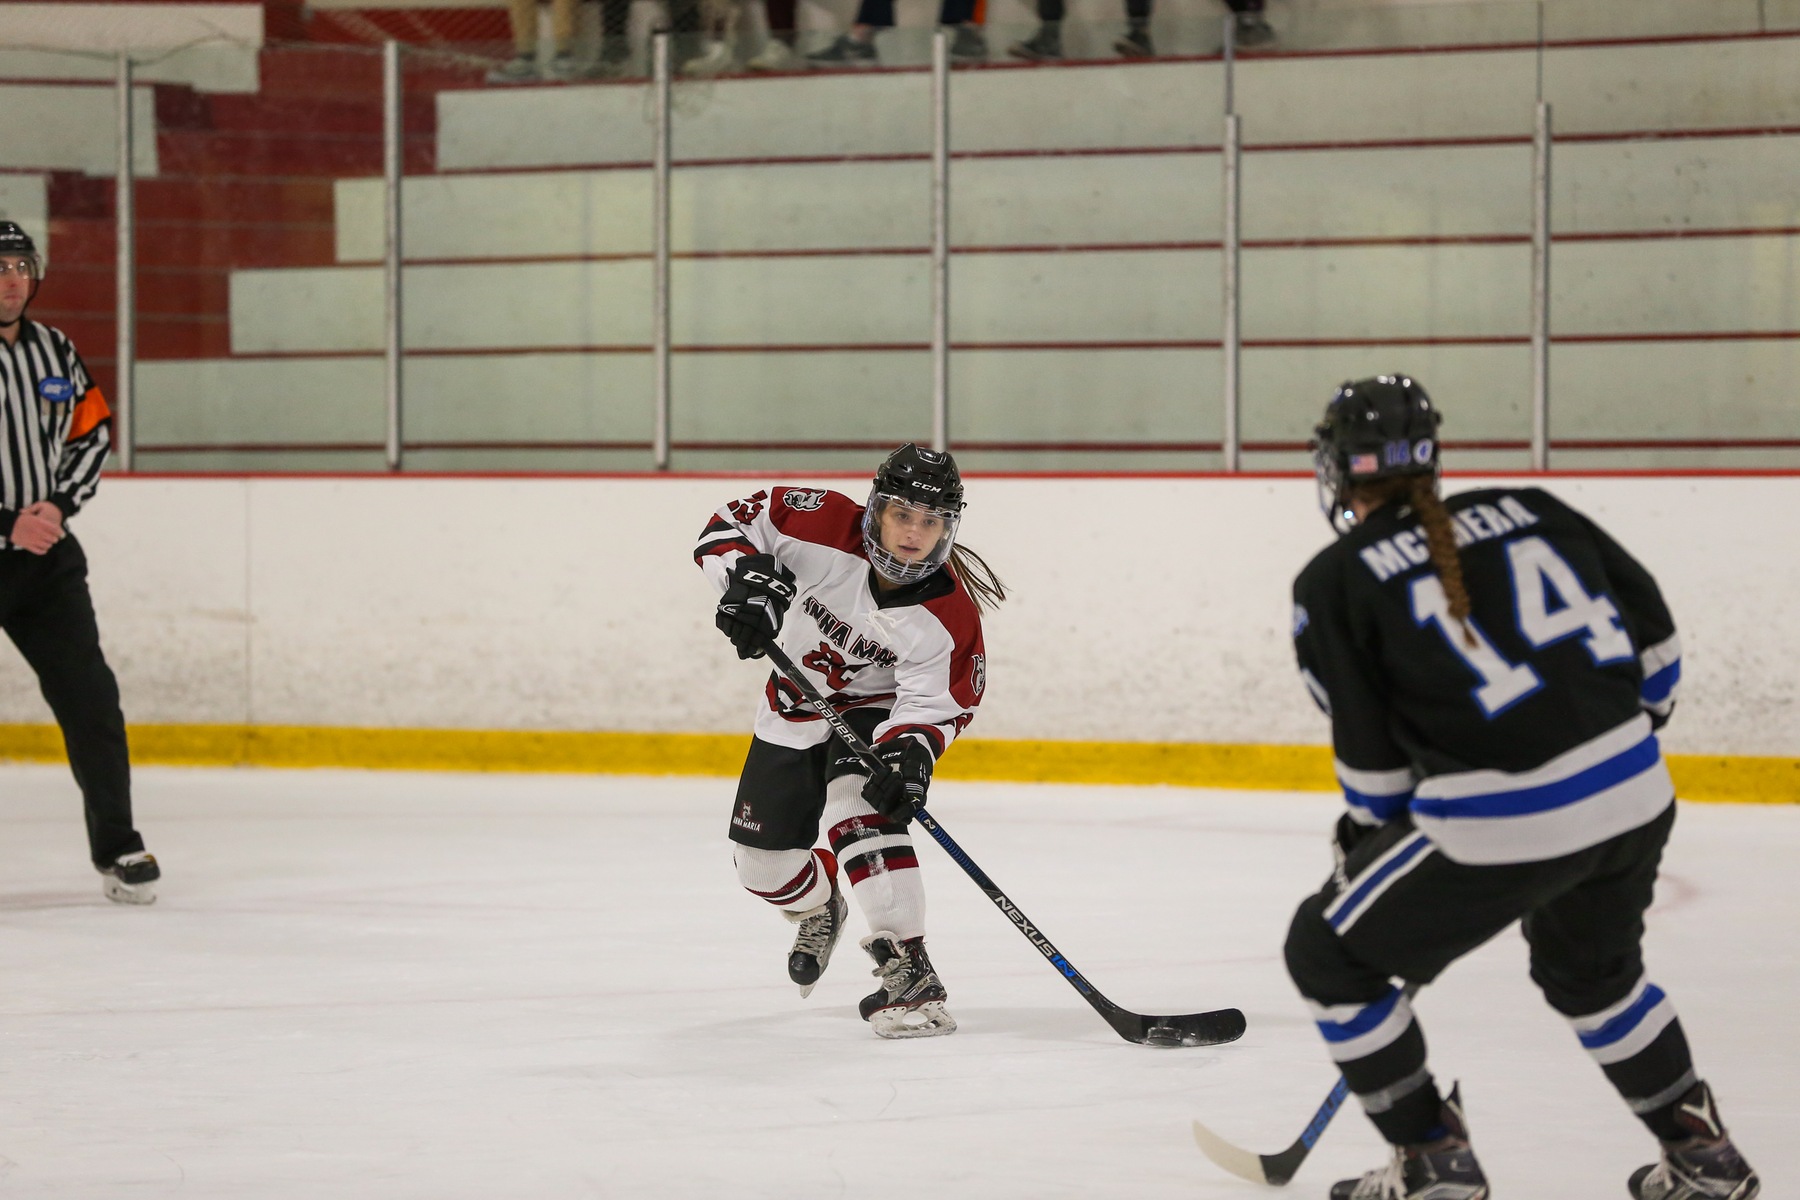 Women's Hockey Earns First Win Against King's College, 1-0